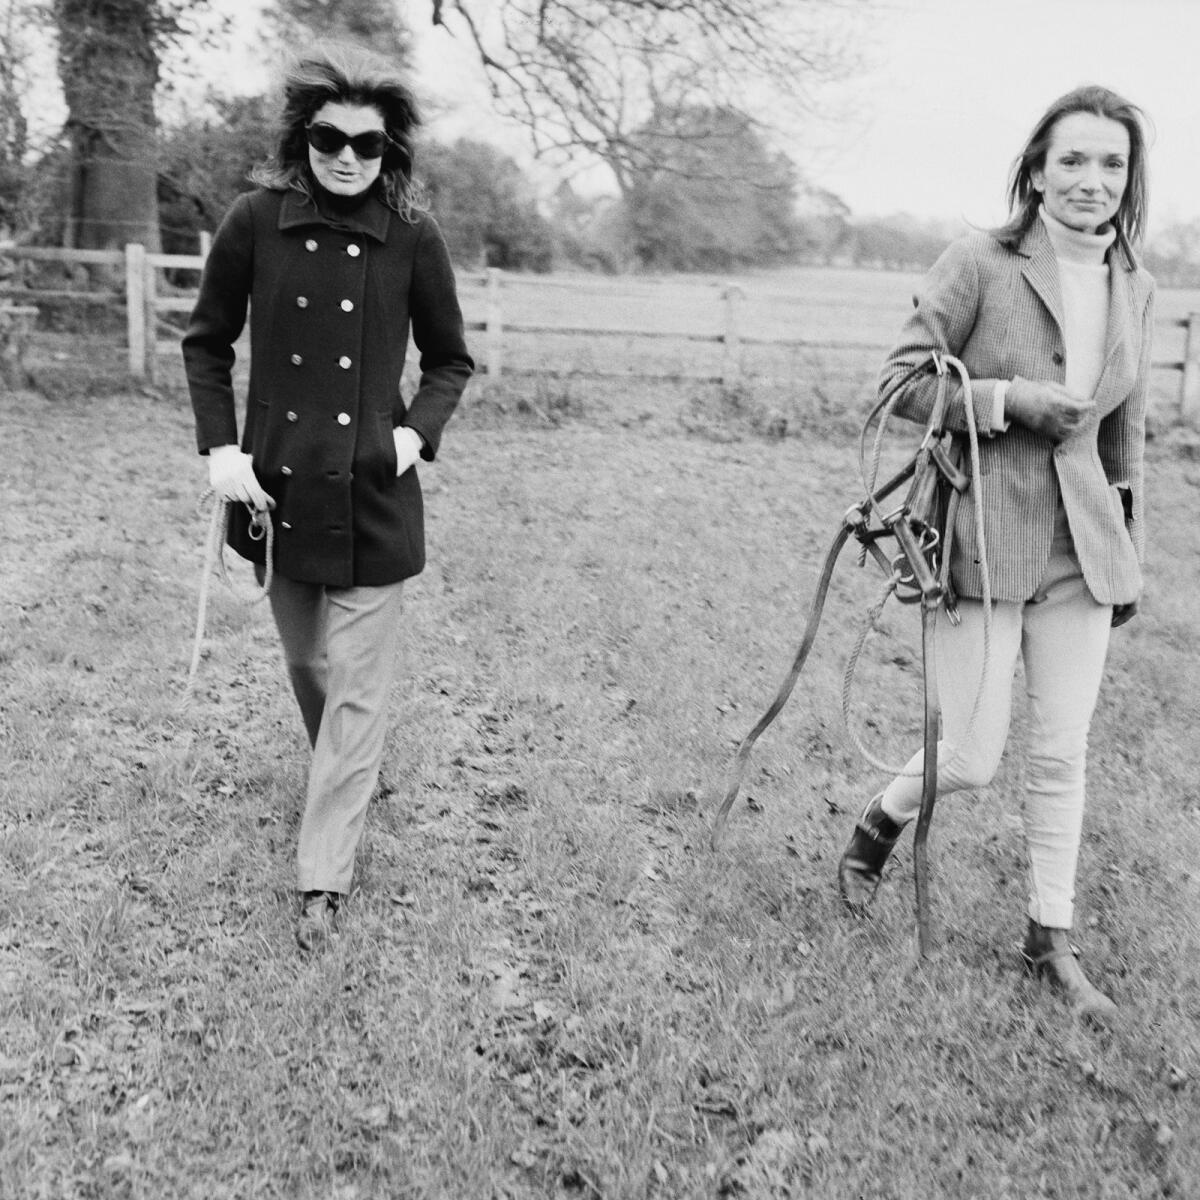 Jacqueline Kennedy Onassis with Lee Radziwill at a horse farm in Britain in November 1968.